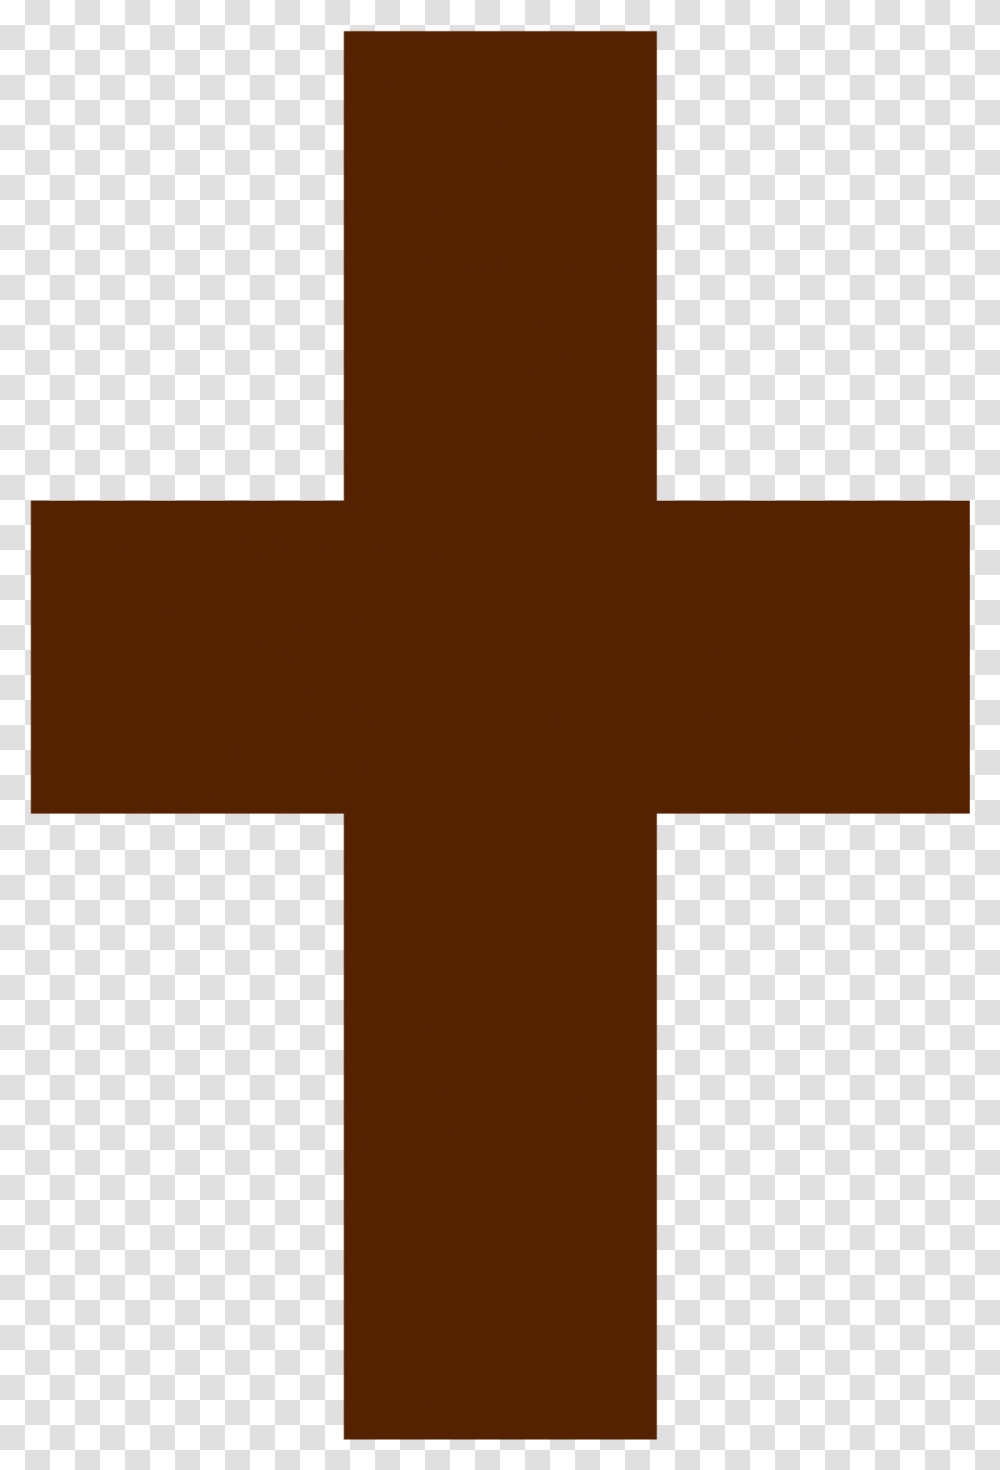 Hd Catholic Cross Cross Simbolo Crucifix Cruz Vector Christianity Pictures, Logo, Trademark, First Aid Transparent Png